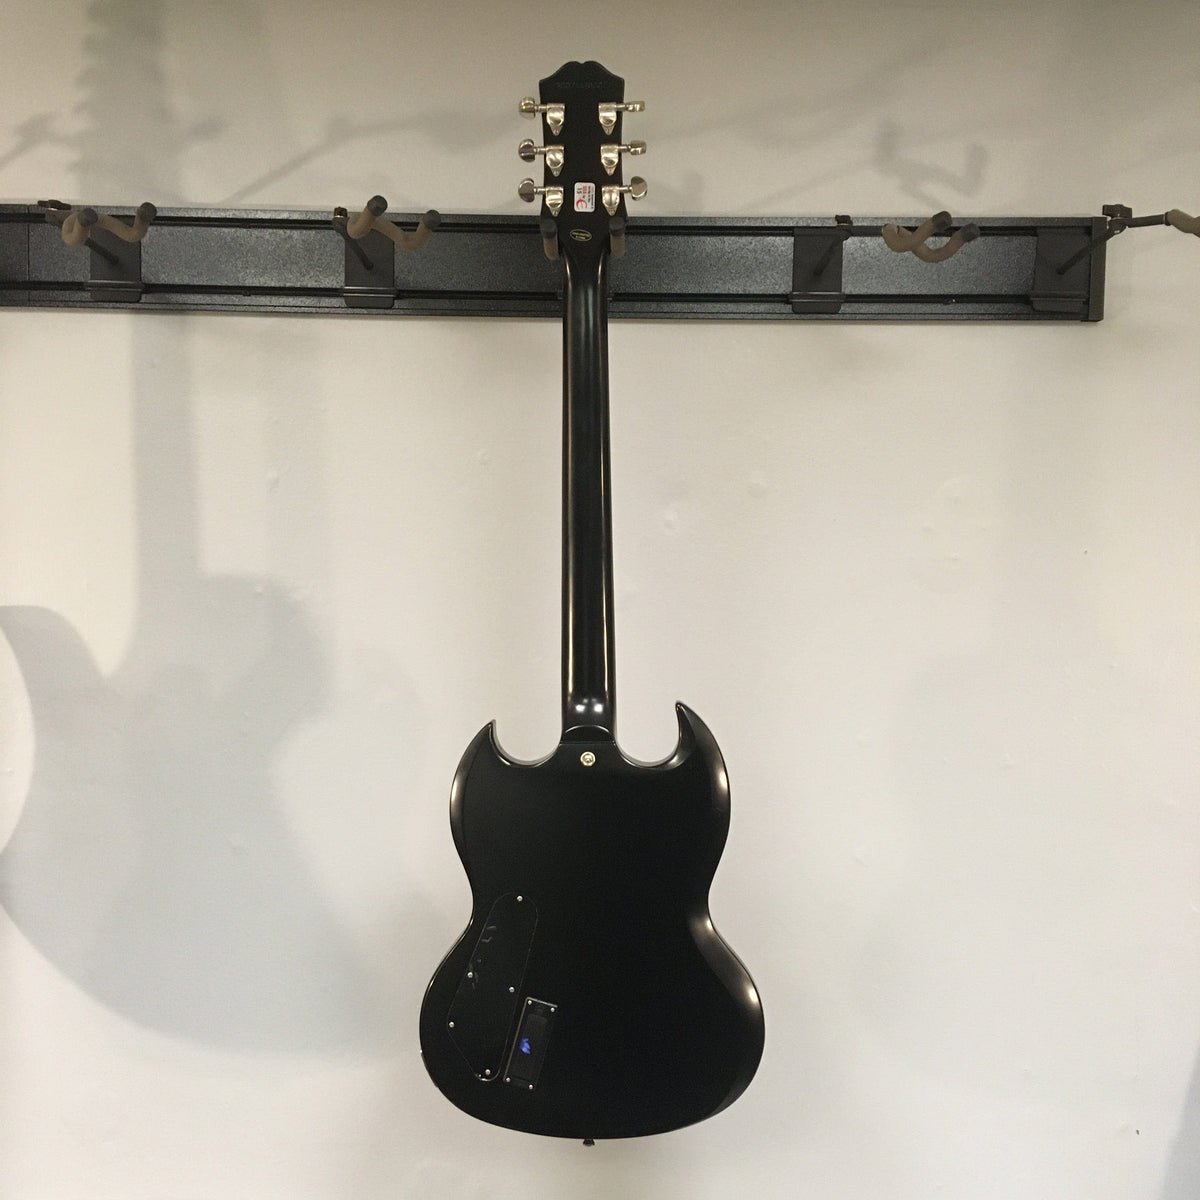 Epiphone SG Prophecy Black Aged Gloss Used